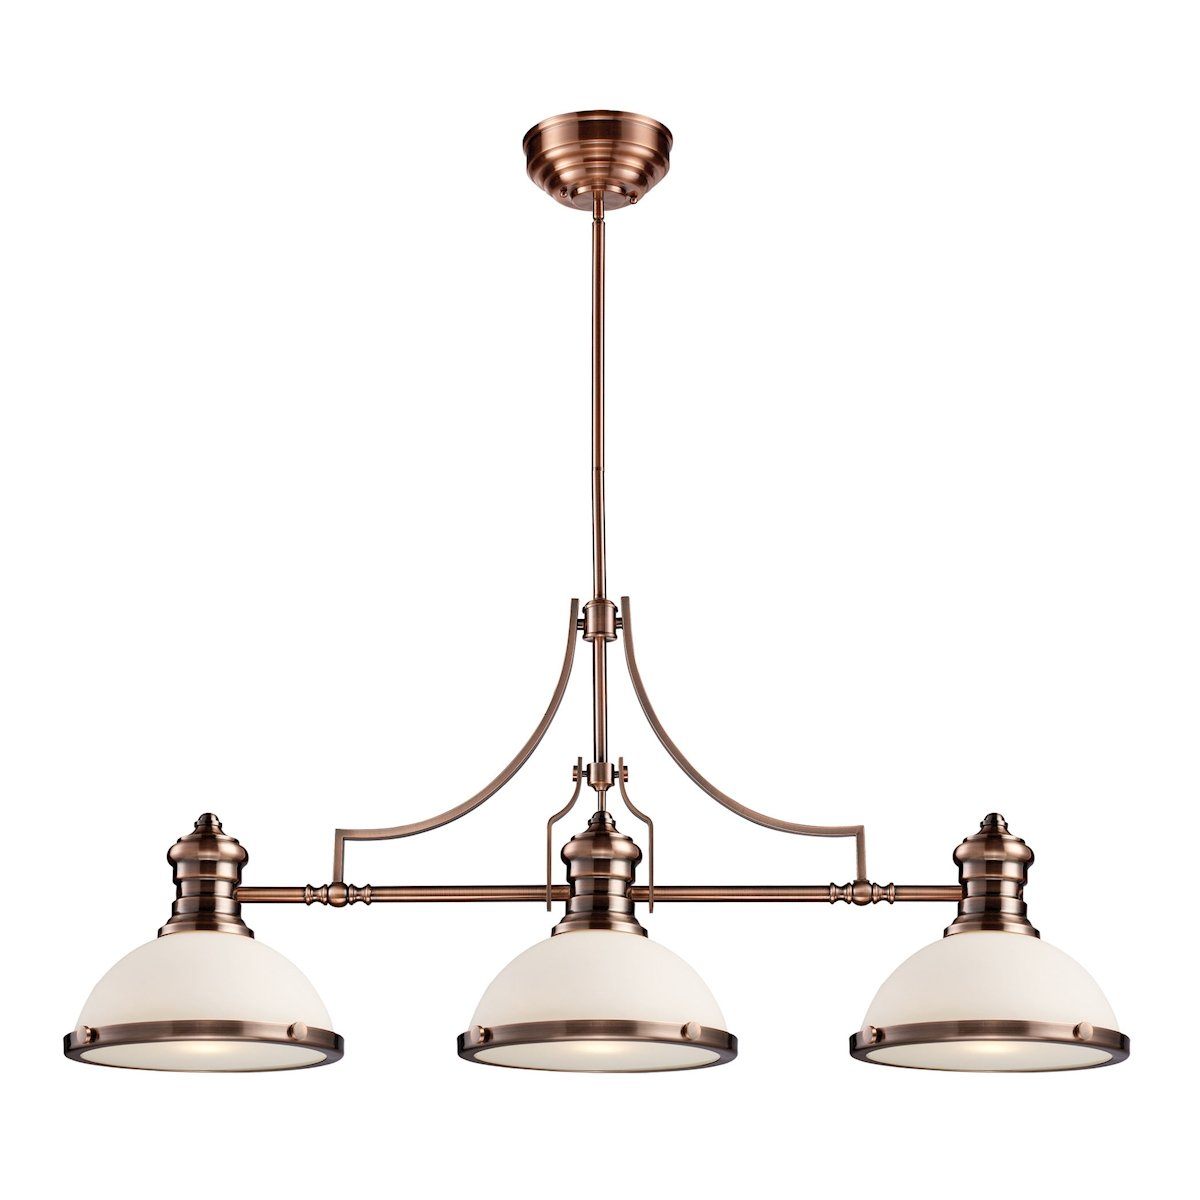 Chadwick 3 Light Billiard In Antique Copper And White Glass Ceiling Elk Lighting 